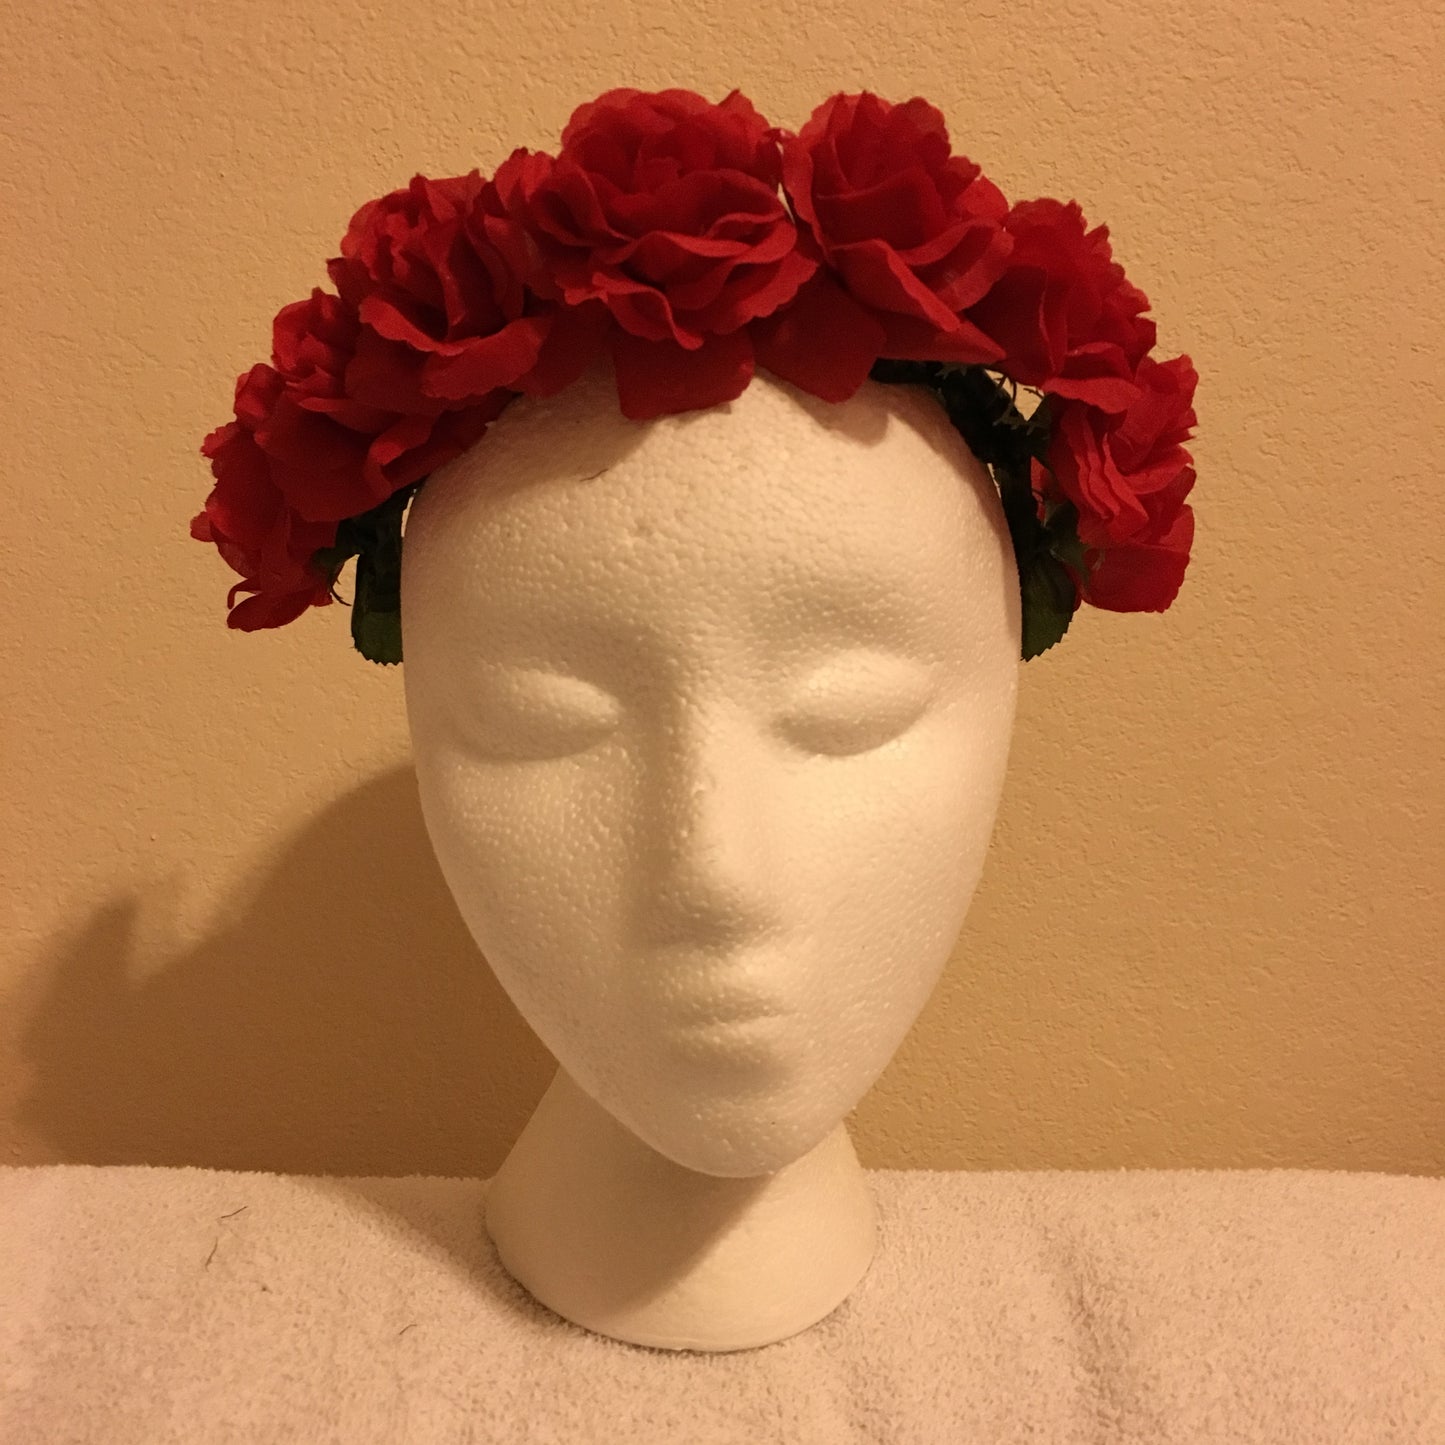 Small Wreath - Red roses